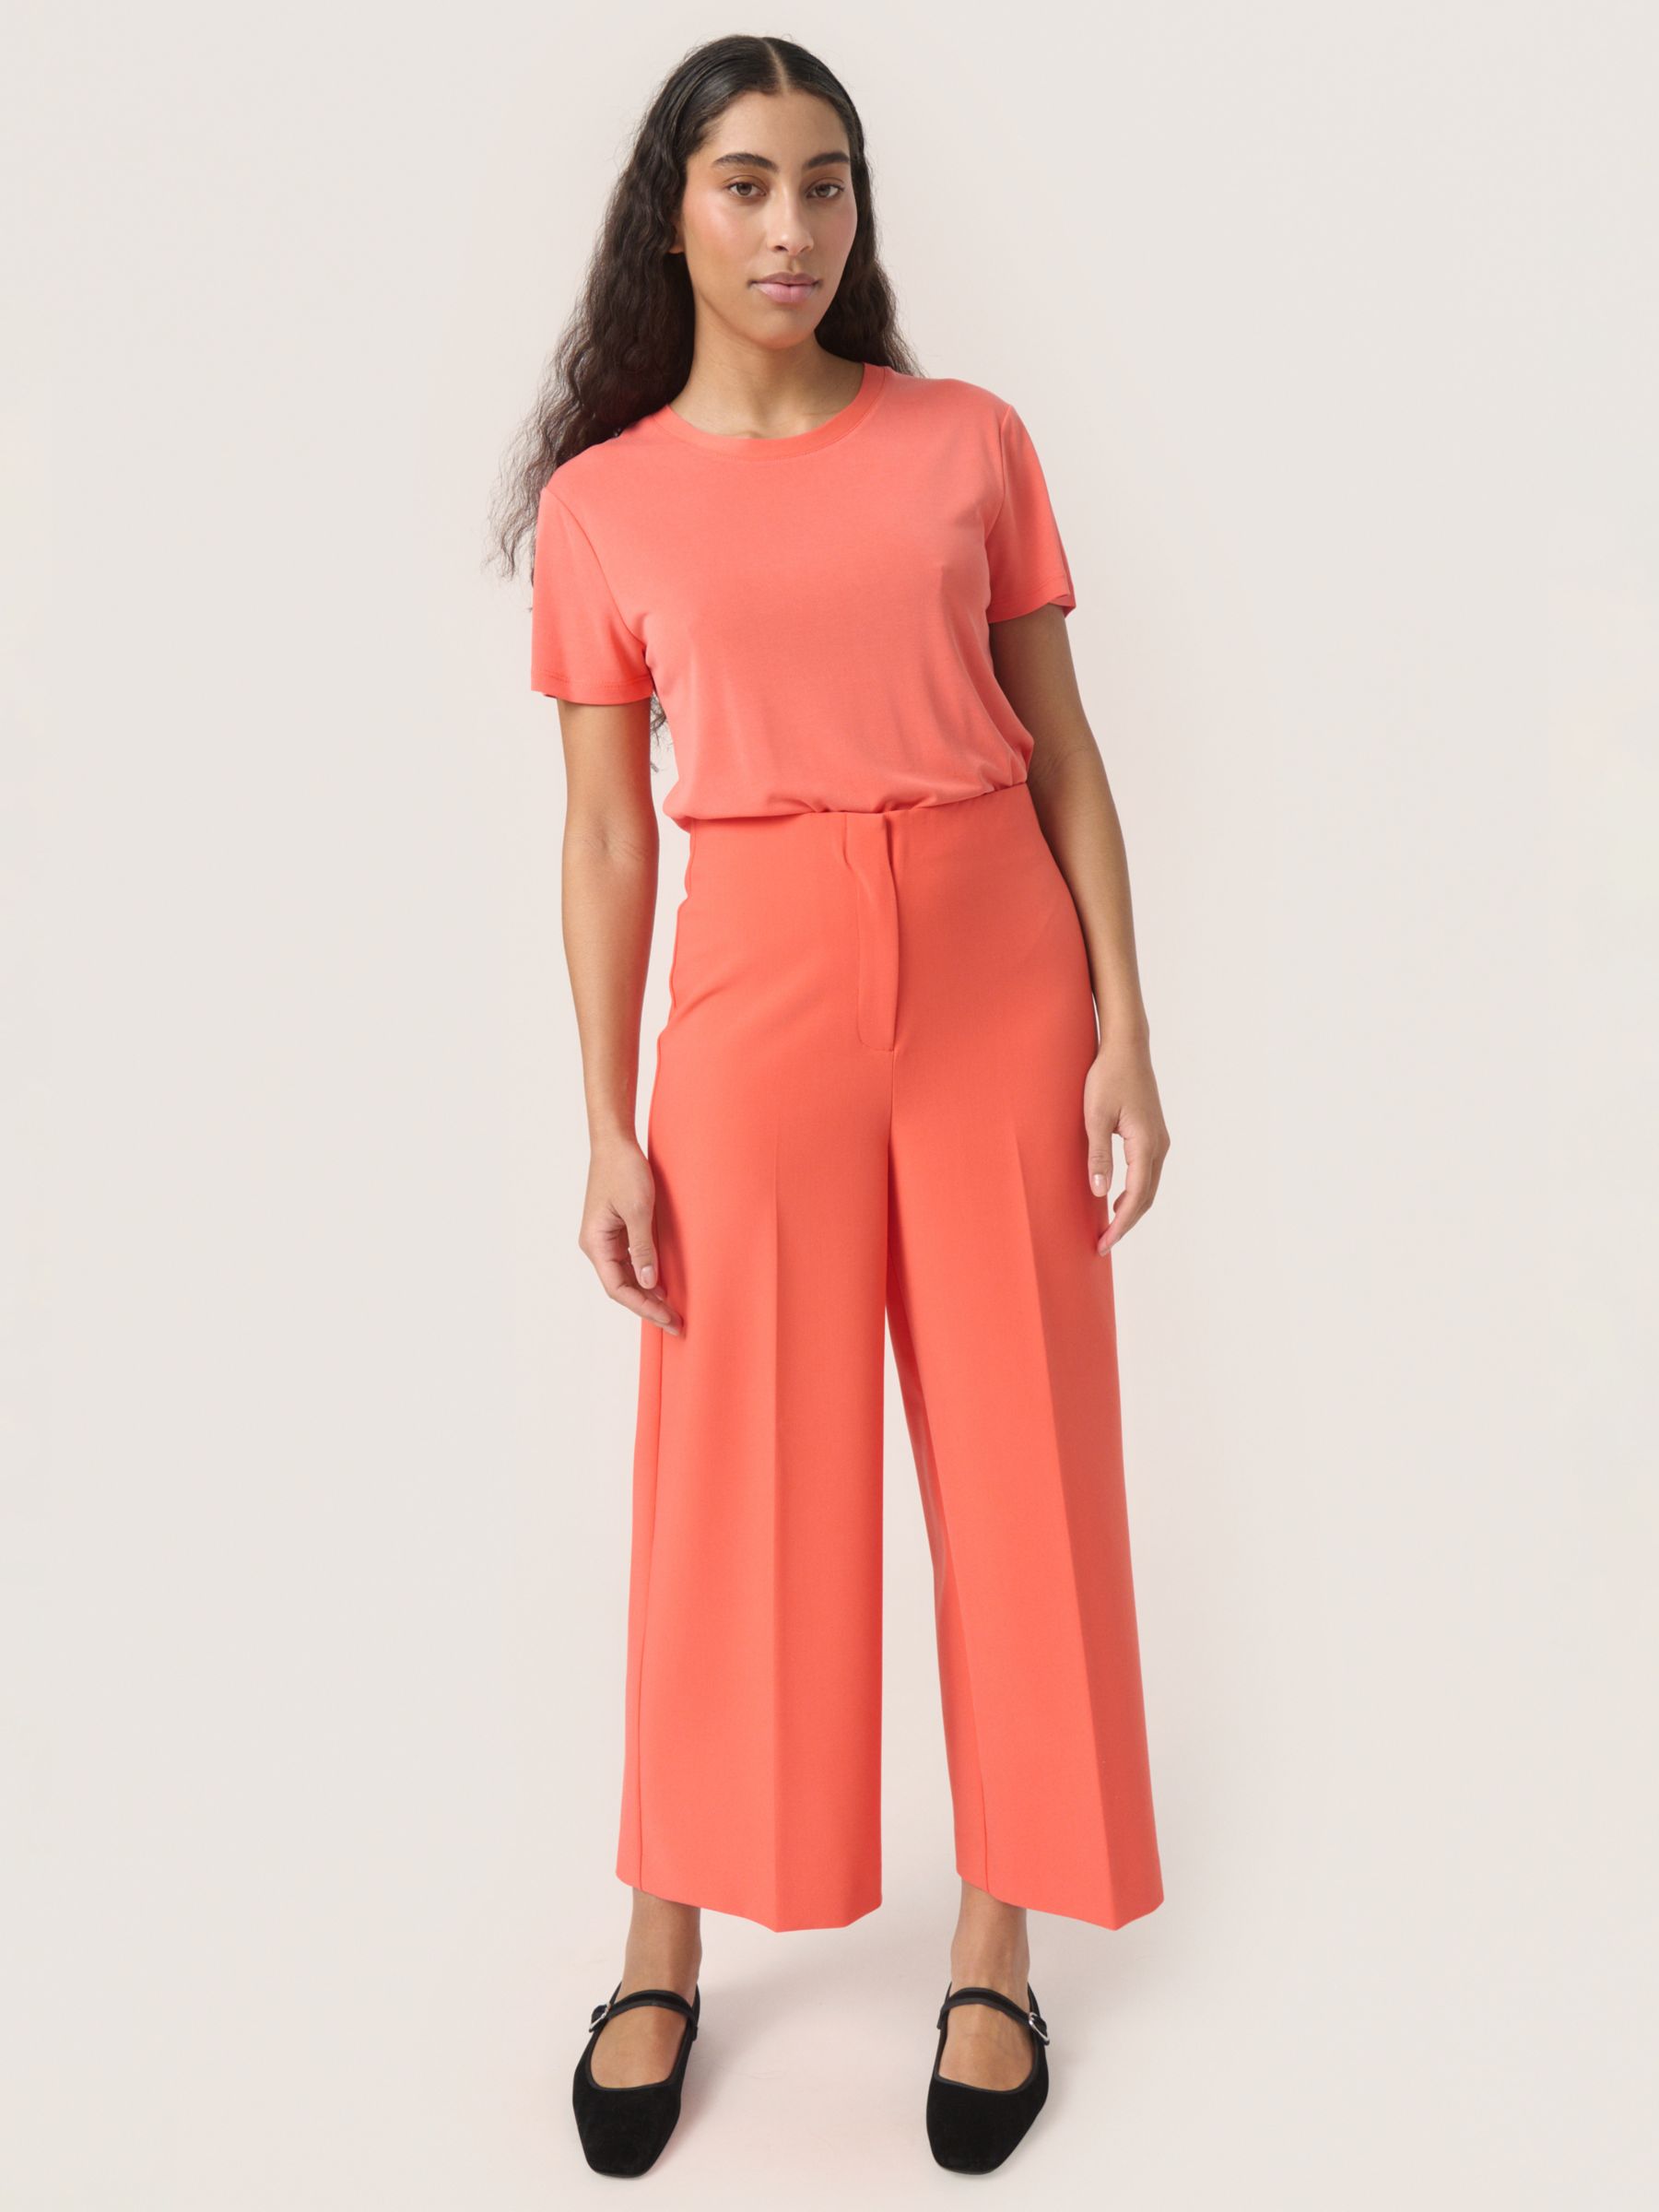 Soaked In Luxury Corinne High Waist Wide Legs Culottes Trousers, Hot Coral, XS